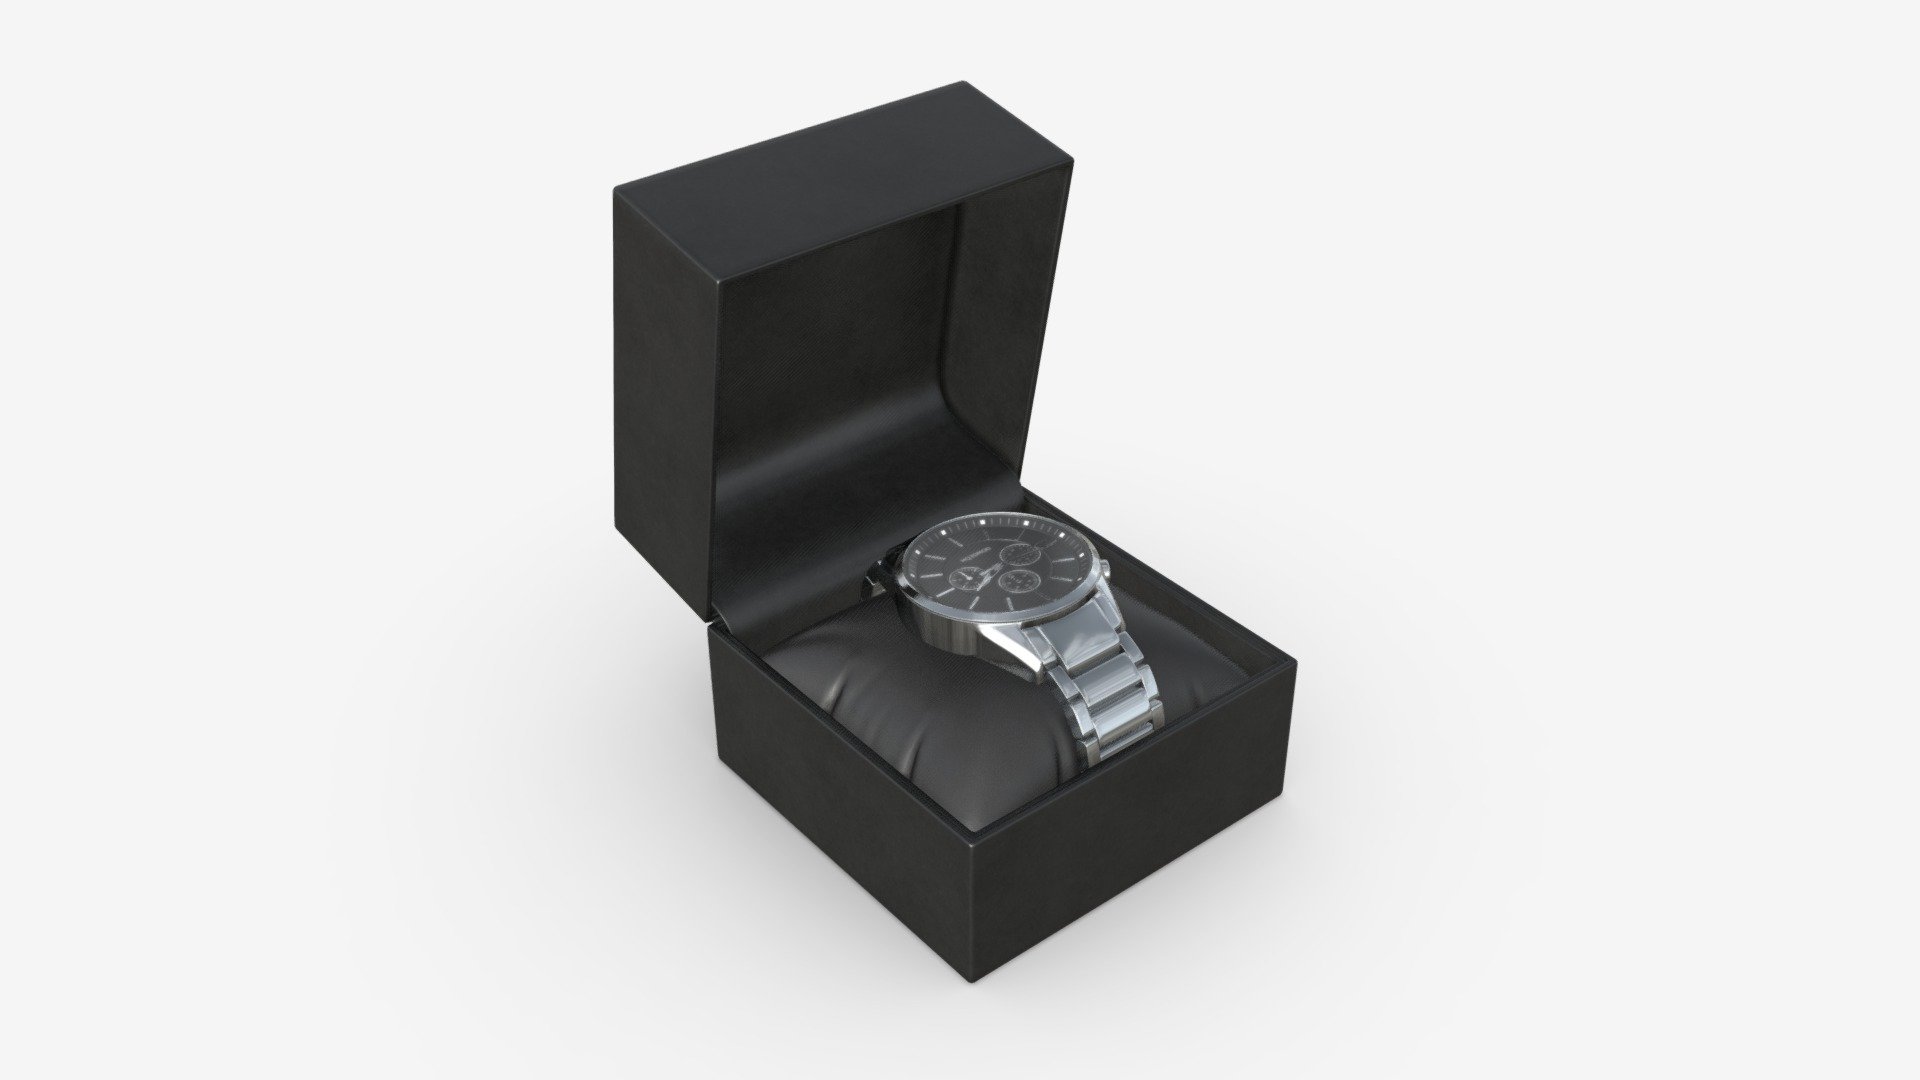 Wristwatch with Steel Bracelet in box 02 - Buy Royalty Free 3D model by HQ3DMOD (@AivisAstics) 3d model